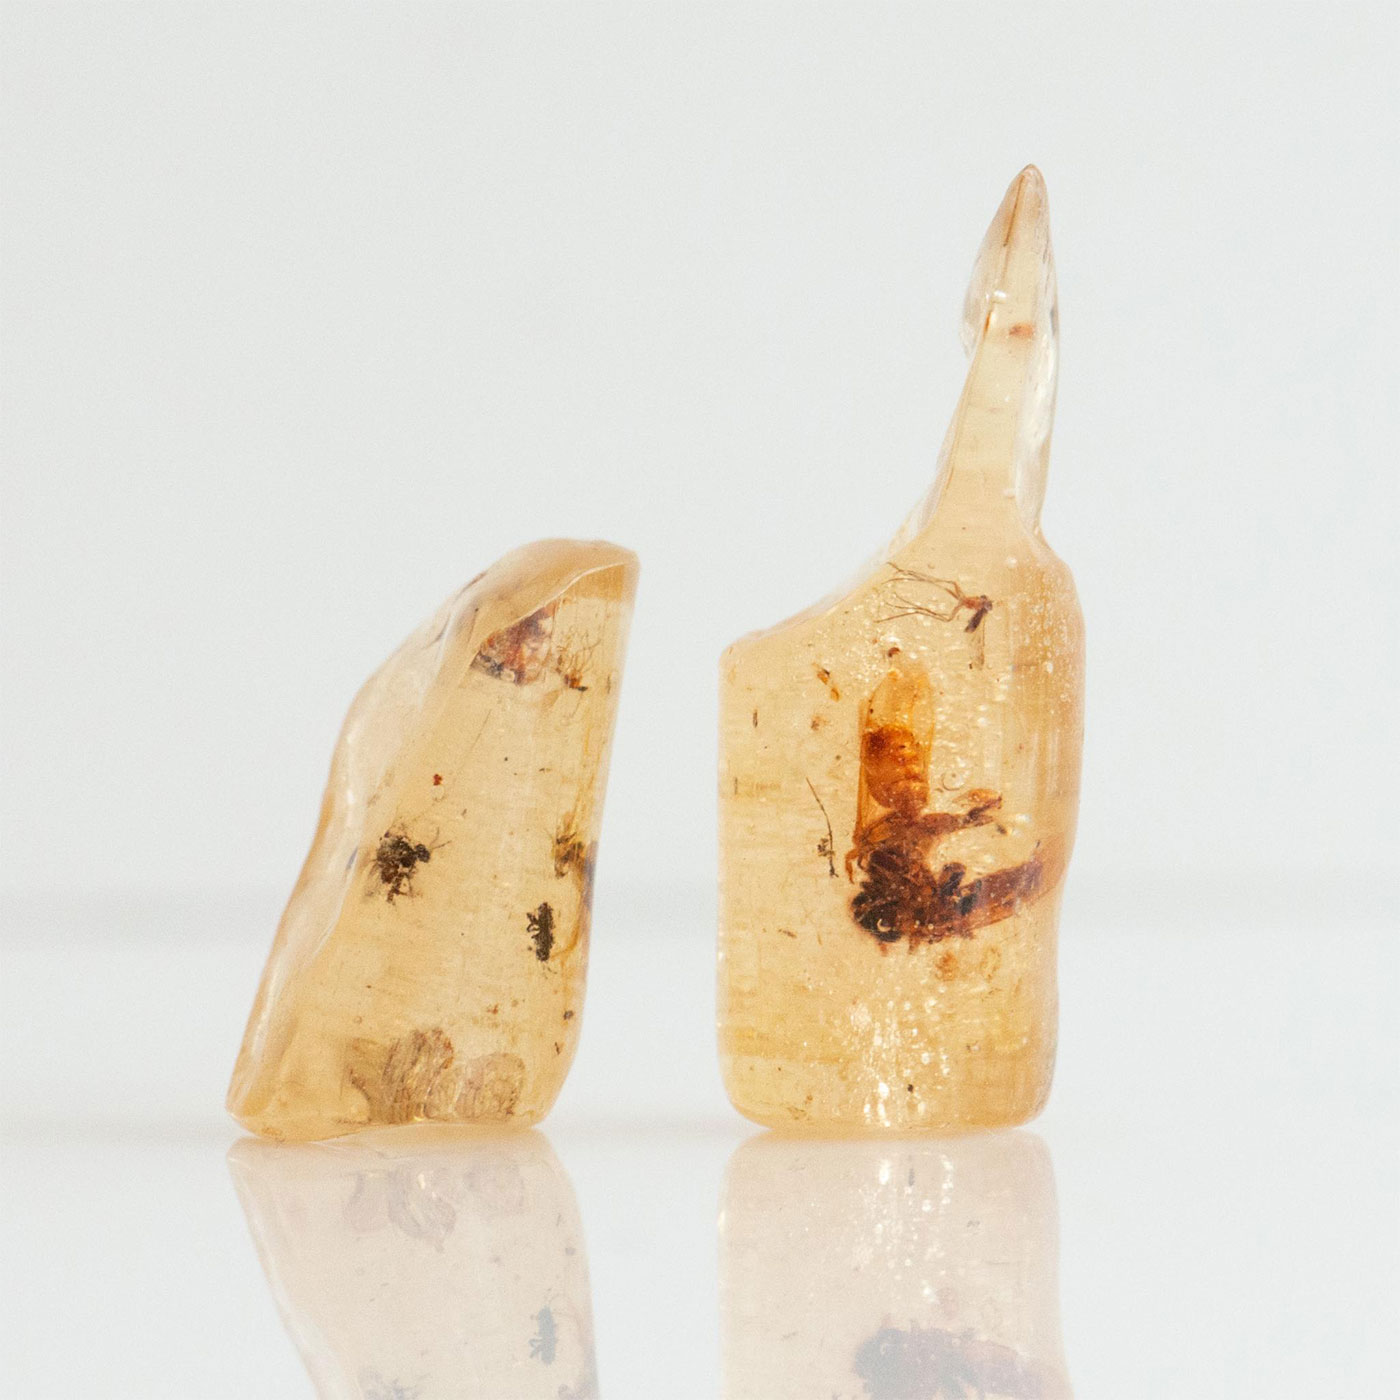 2 POLISHED LIGHT HONEY COPAL AMBER RODS W. MANY INSECTS - Image 8 of 8